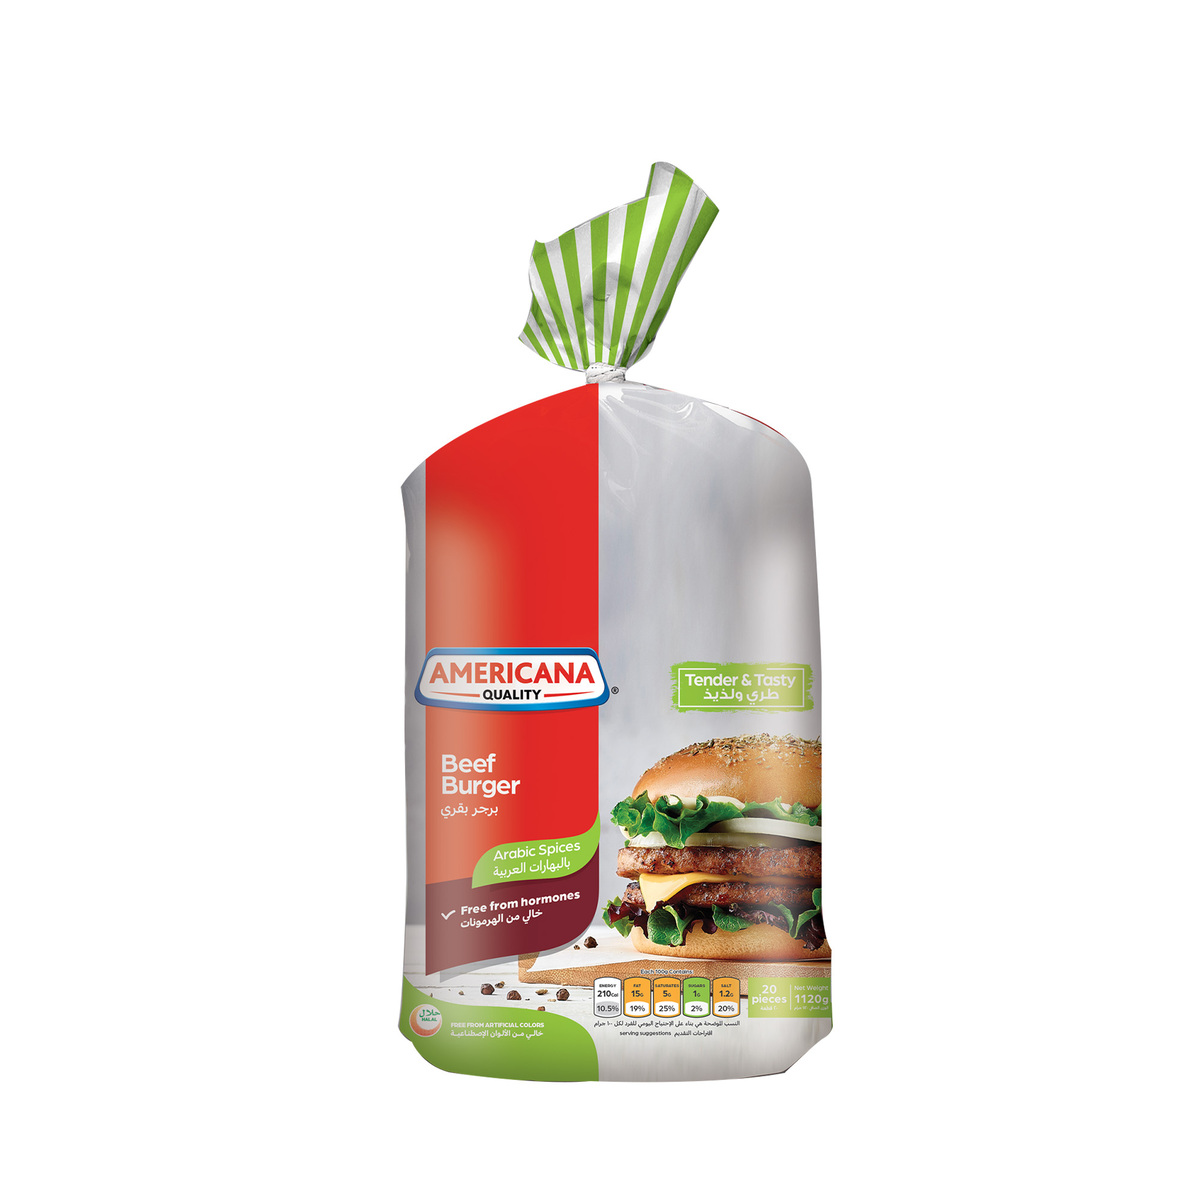 Americana Arabic Spices Beef Burger Value Pack 2 x 20pcs